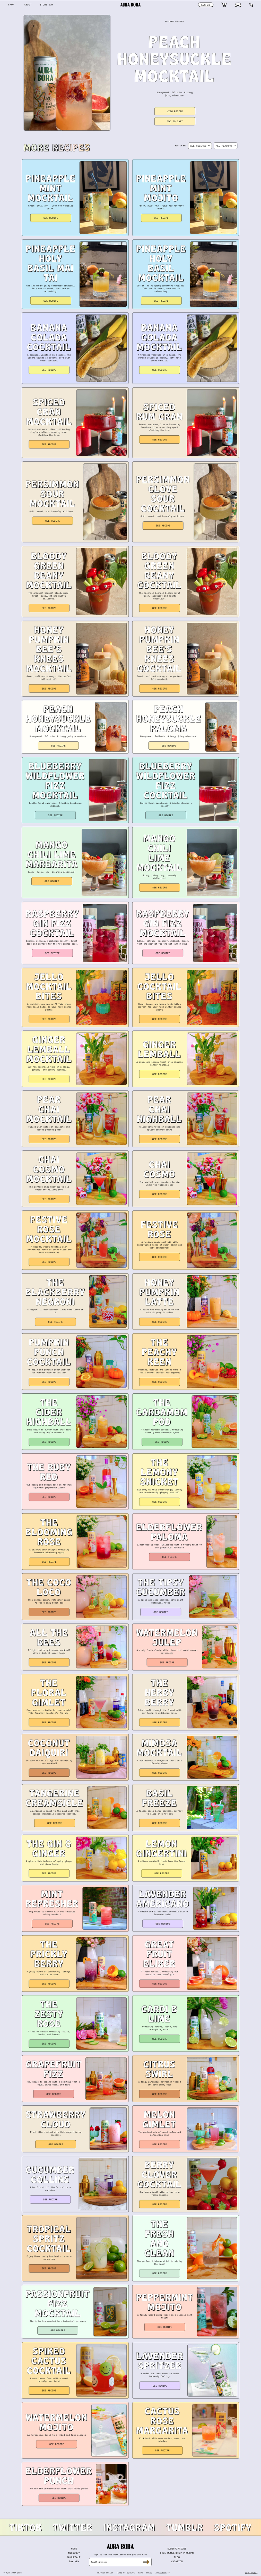 Aura Bora Landing Page Example: Aura Bora is a sparkling water made from real herbs, fruits, and flowers for earthly tastes and heavenly feelings. 0 Calories, 0 Sugar, 0 Sodium.